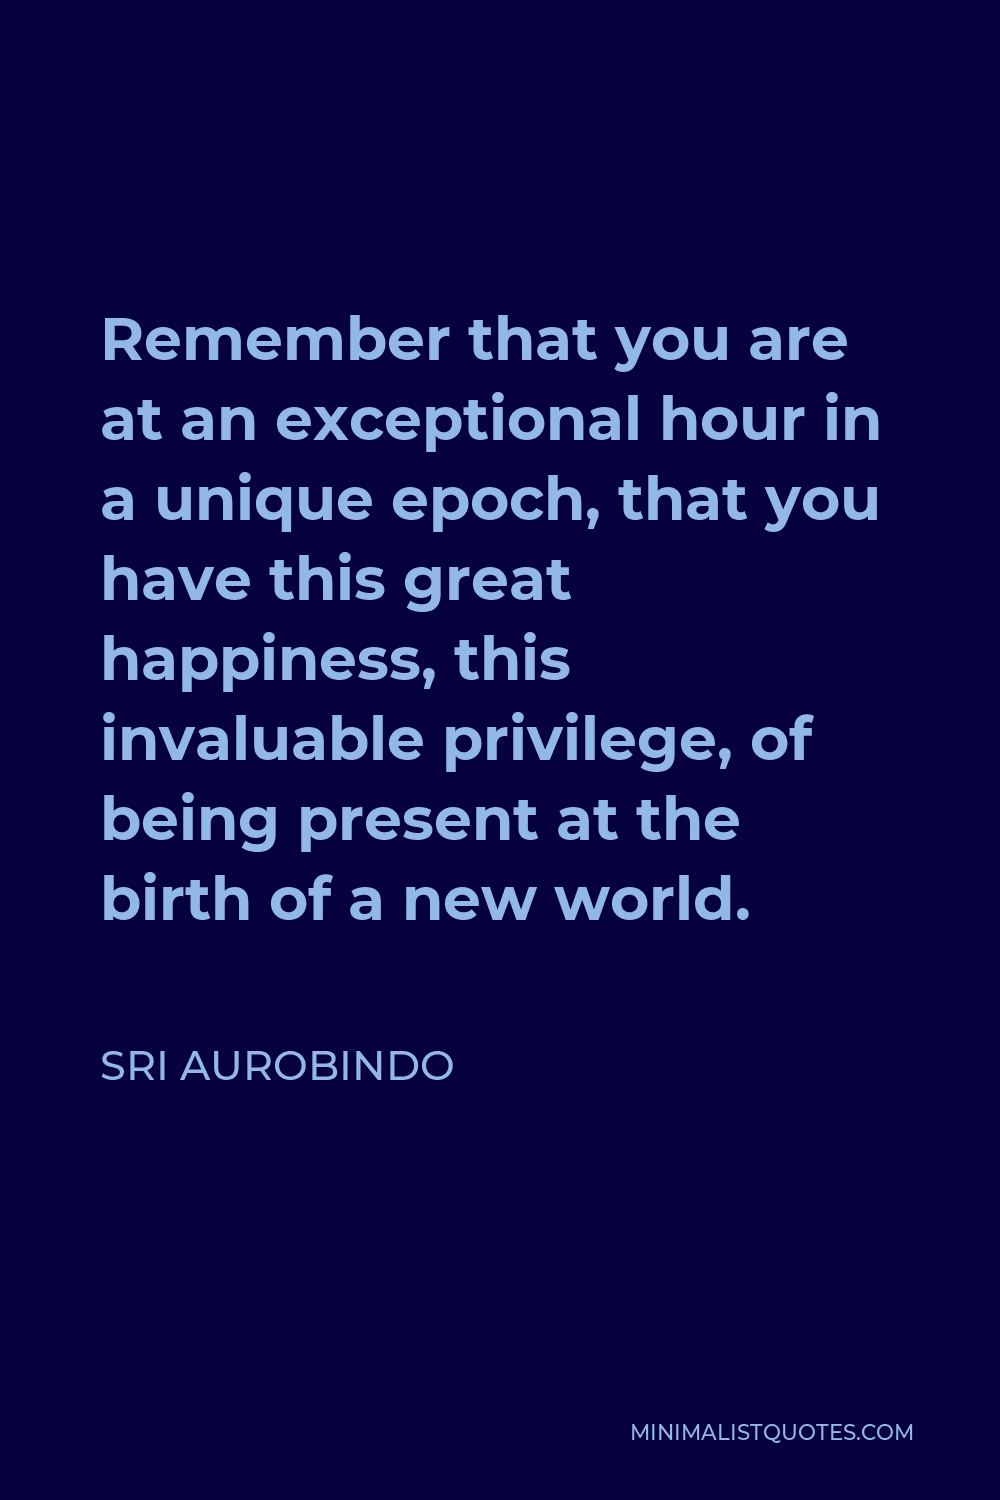 Sri Aurobindo Quote - Remember that you are at an exceptional hour in a unique epoch, that you have this great happiness, this invaluable privilege, of being present at the birth of a new world.